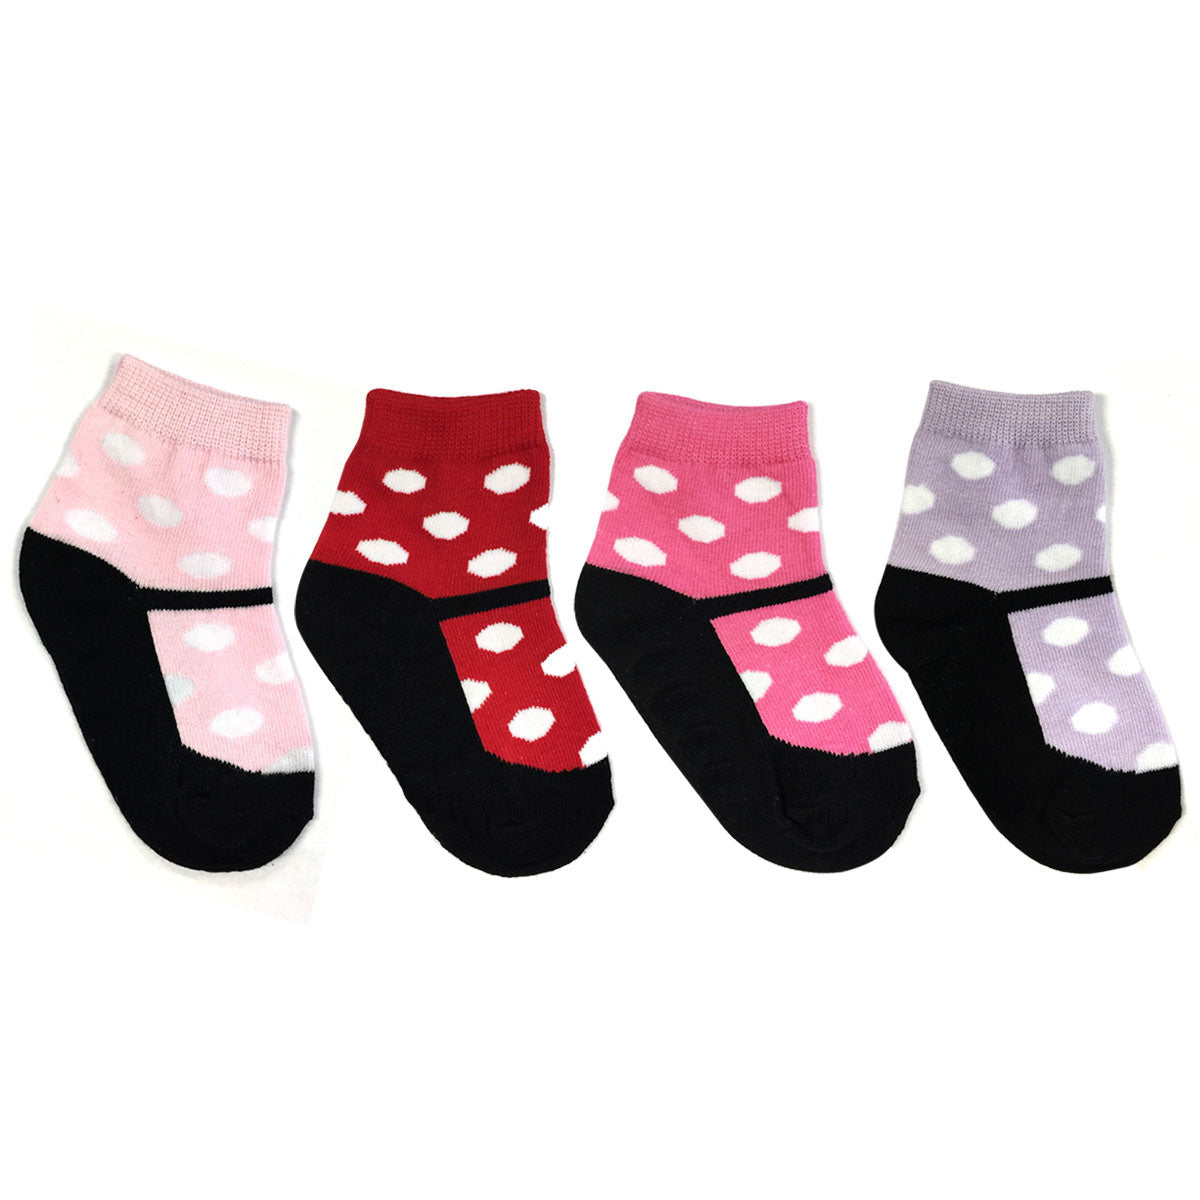 Wrapables Non-Slip Cute Mary Jane Socks for Baby (Set of 4)